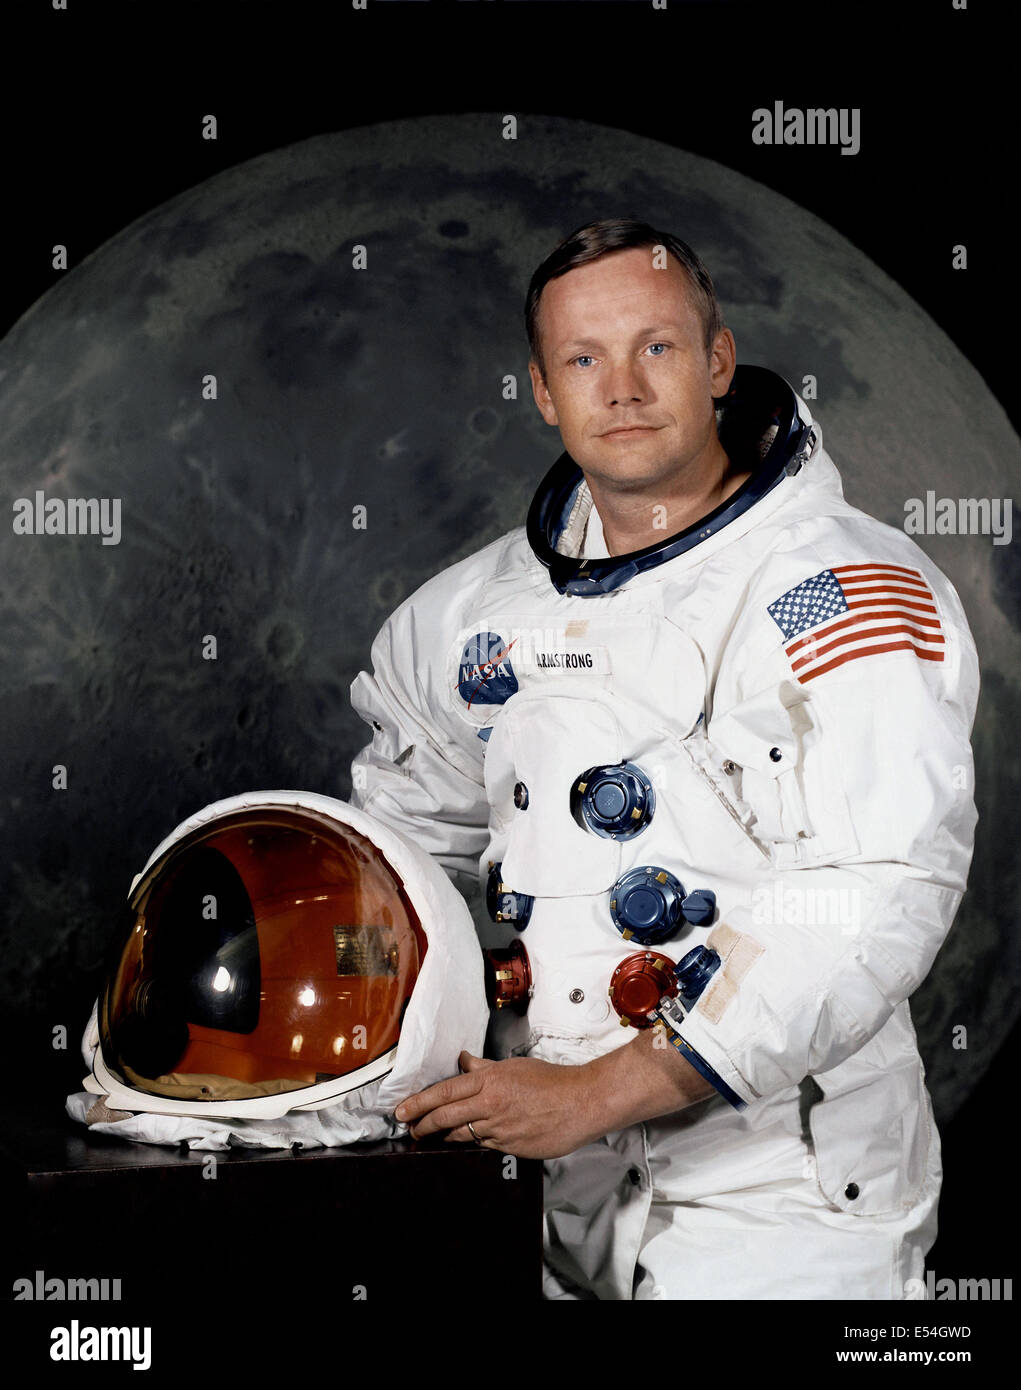 Portrait of the prime crew of the Apollo 11 lunar landing mission Commander, Neil A. Armstrong in spacesuit at Johnson Space Center May 1, 1969 in Houston, Texas. Armstrong became the first person to set foot on the lunar surface. Stock Photo